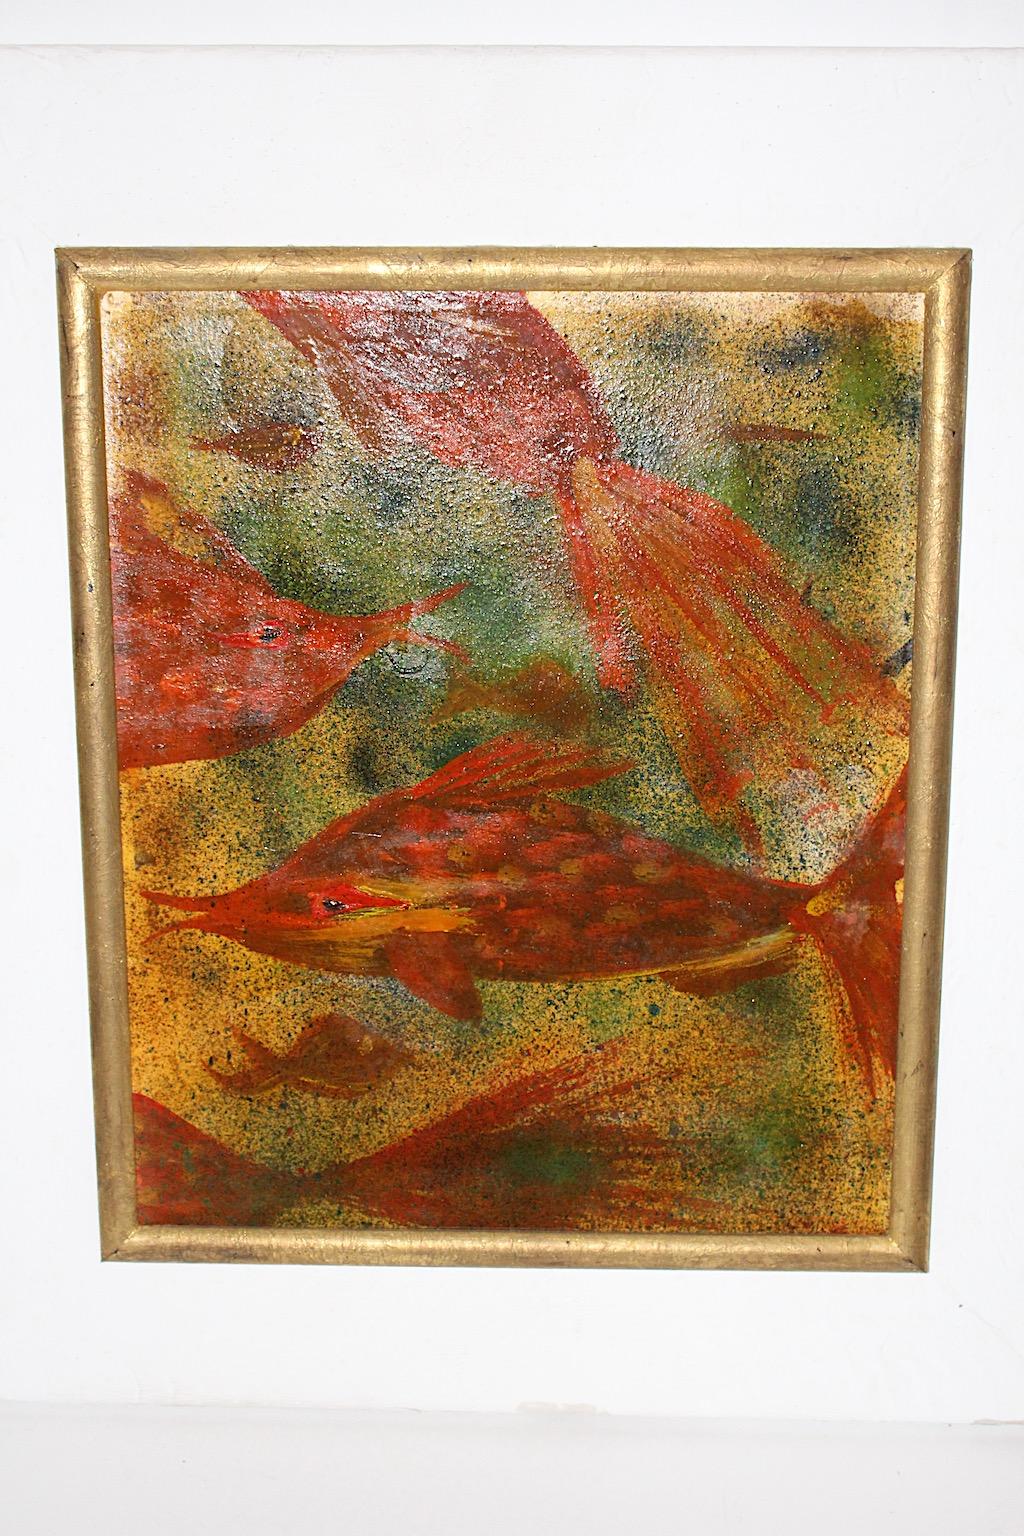 Mid-Century Modern vintage painting animal motif fishes by Robert Libeski 1946 Vienna.
An amazing painting with a motif looks like the painter was situated in the middle of a sea surrounded from fishes and sunbeams.
This painting shows wonderful